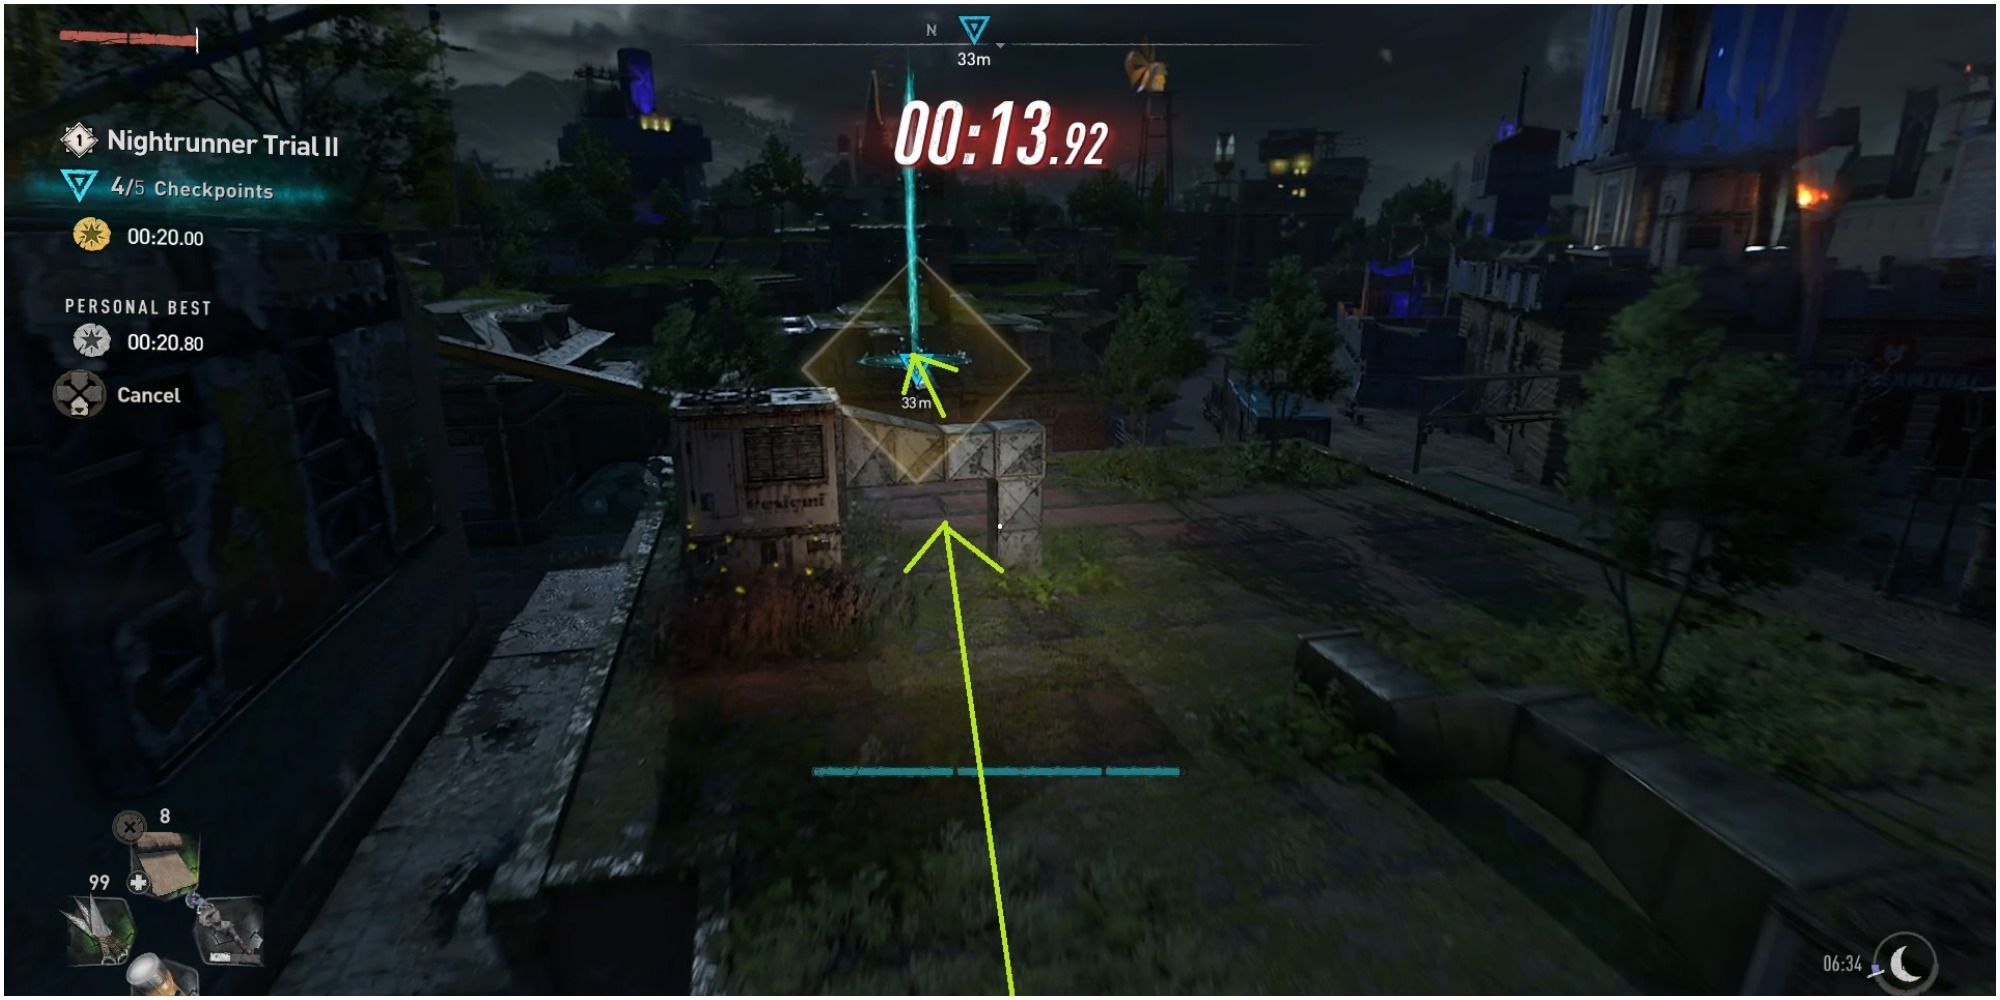 Dying Light 2 Optimal Path To Get To The Fifth Checkpoint In The Second Nightrunner Trial